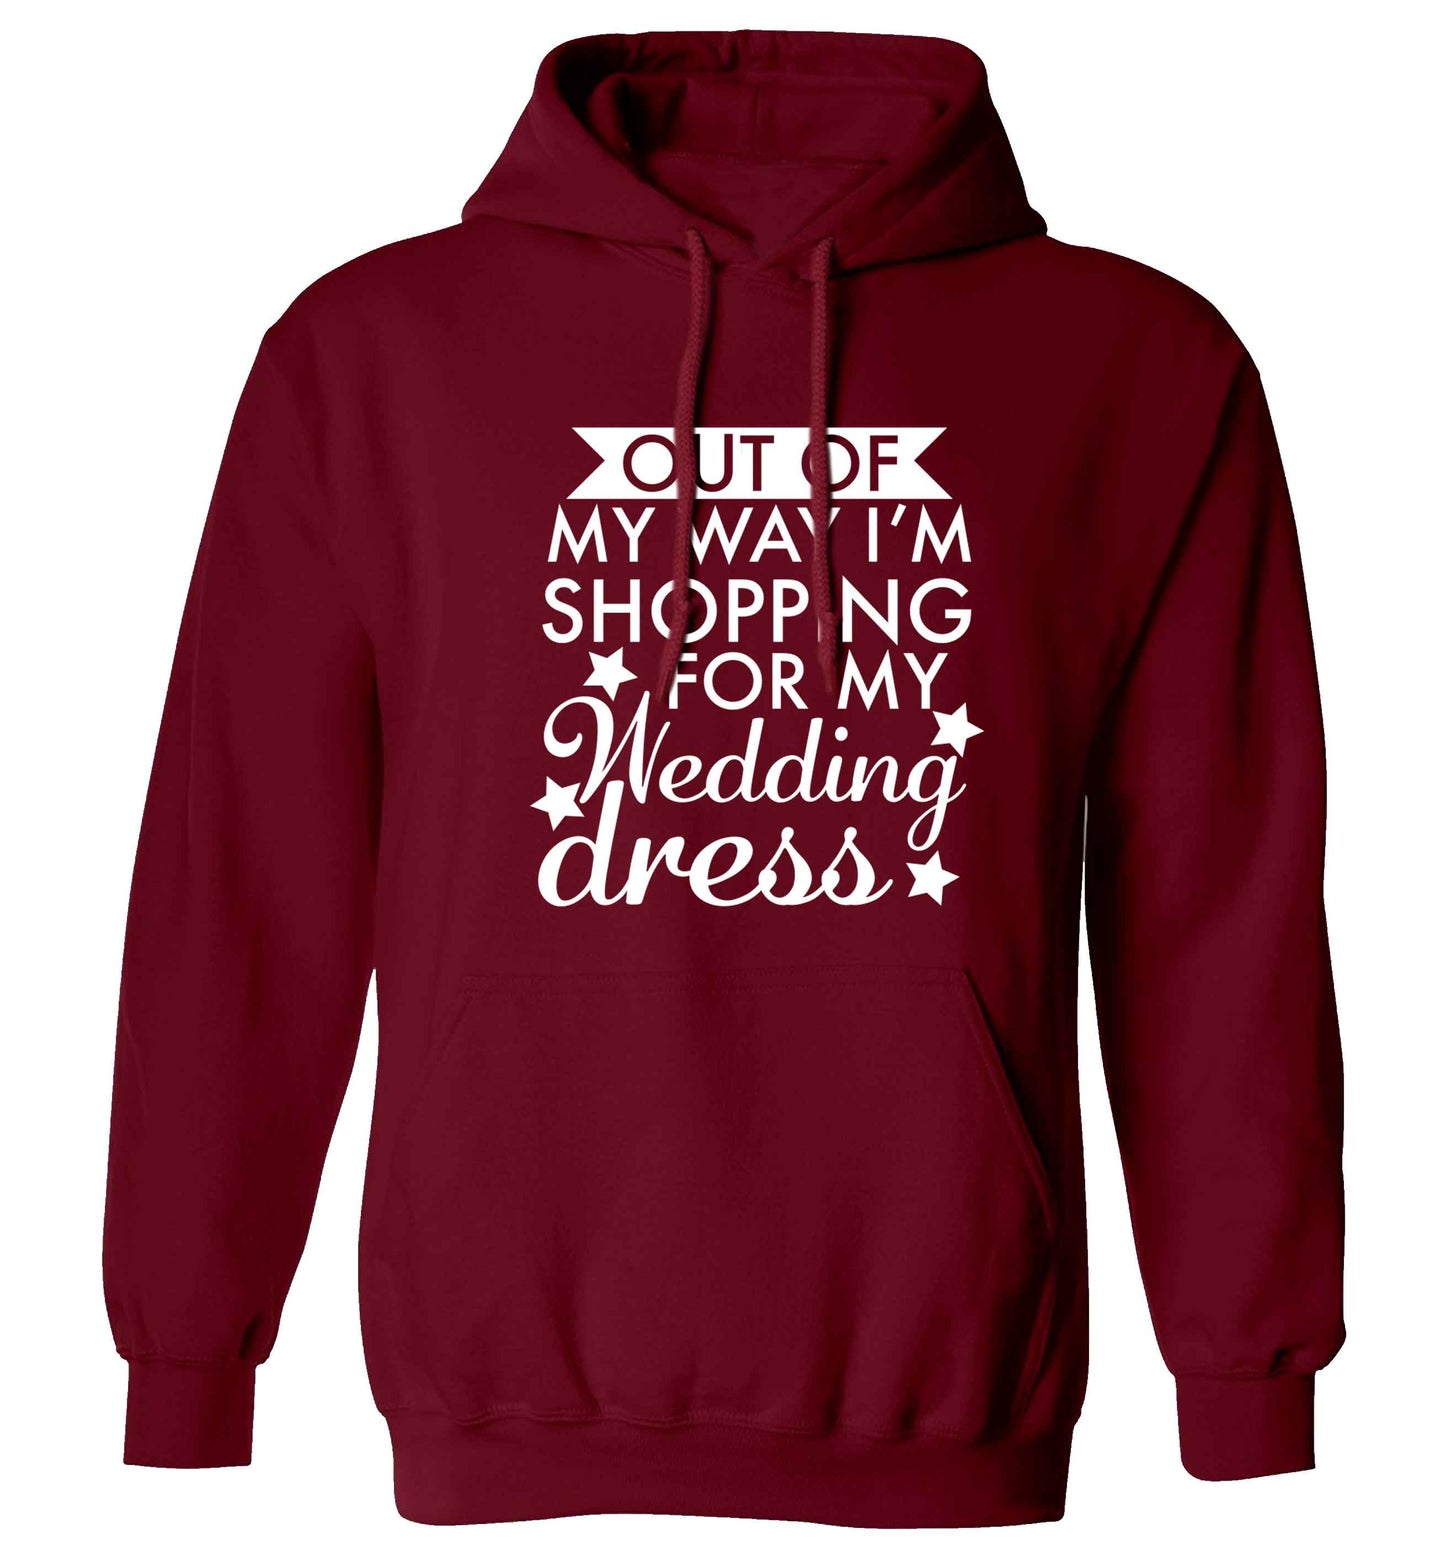 Out of my way I'm shopping for my wedding dress adults unisex maroon hoodie 2XL